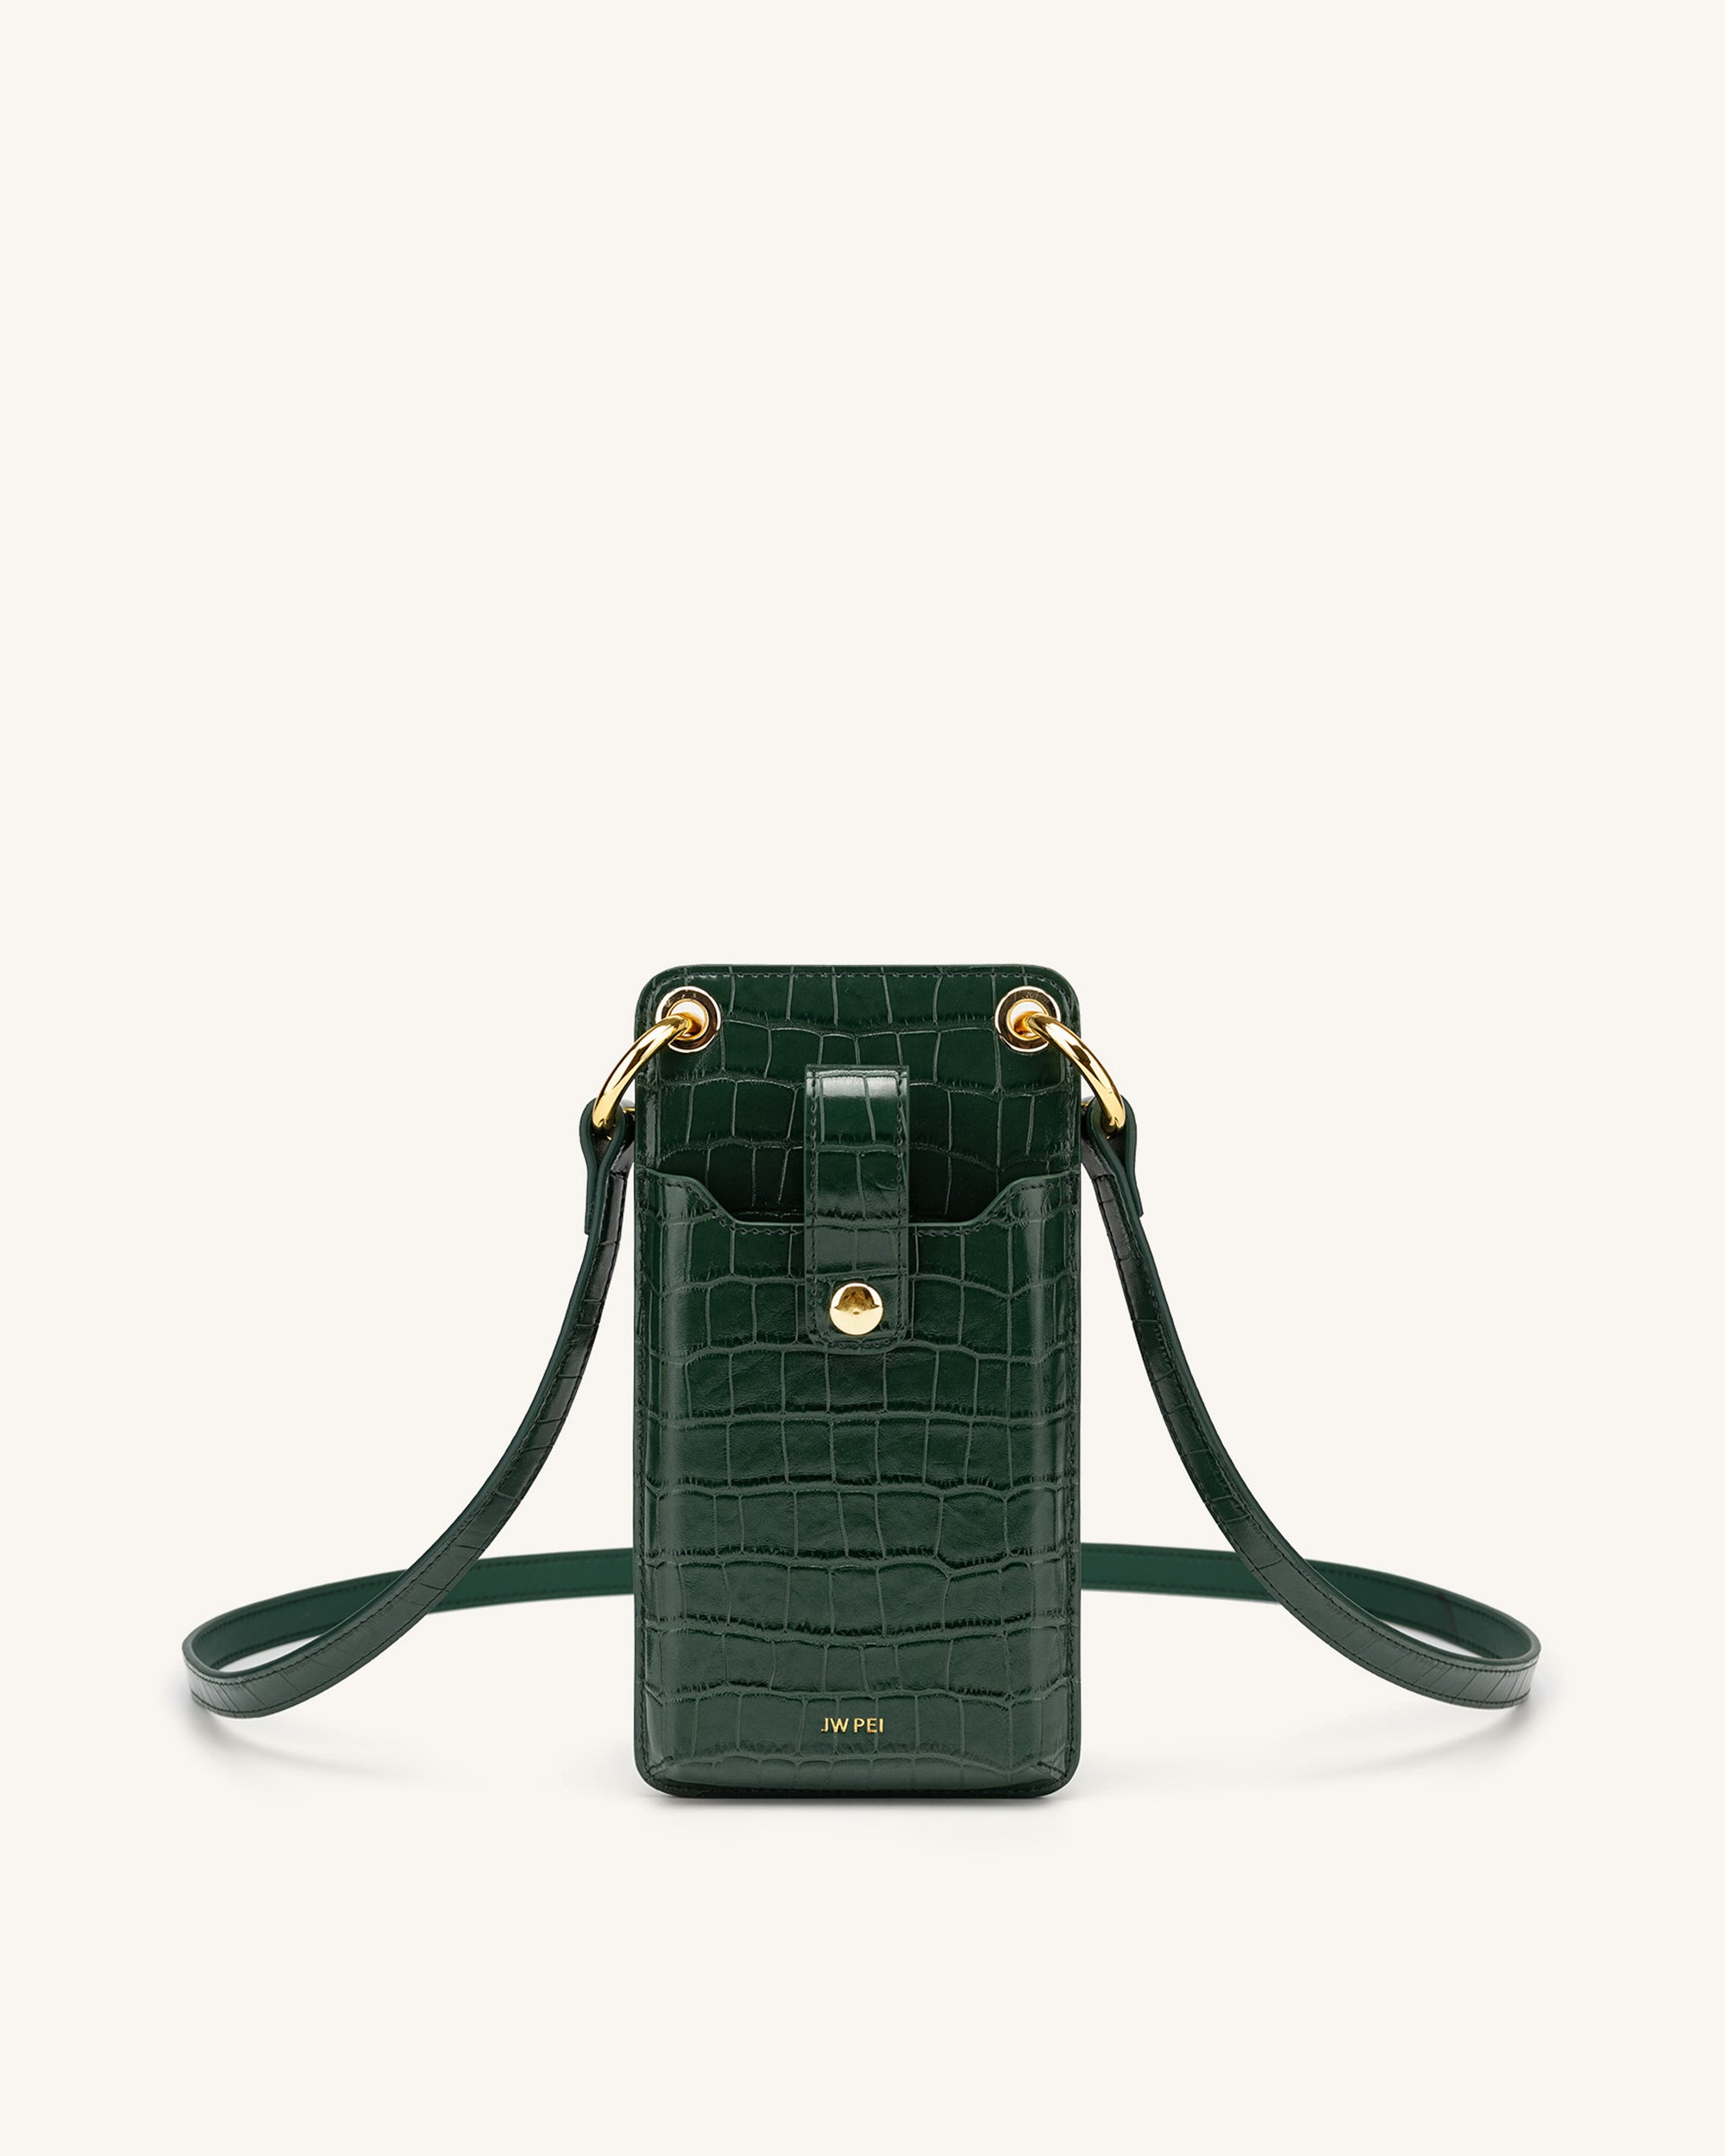 10 Crossbody Phone Cases To Try This Season  Iphone purse, Crossbody phone  purse, Smartphone accessories